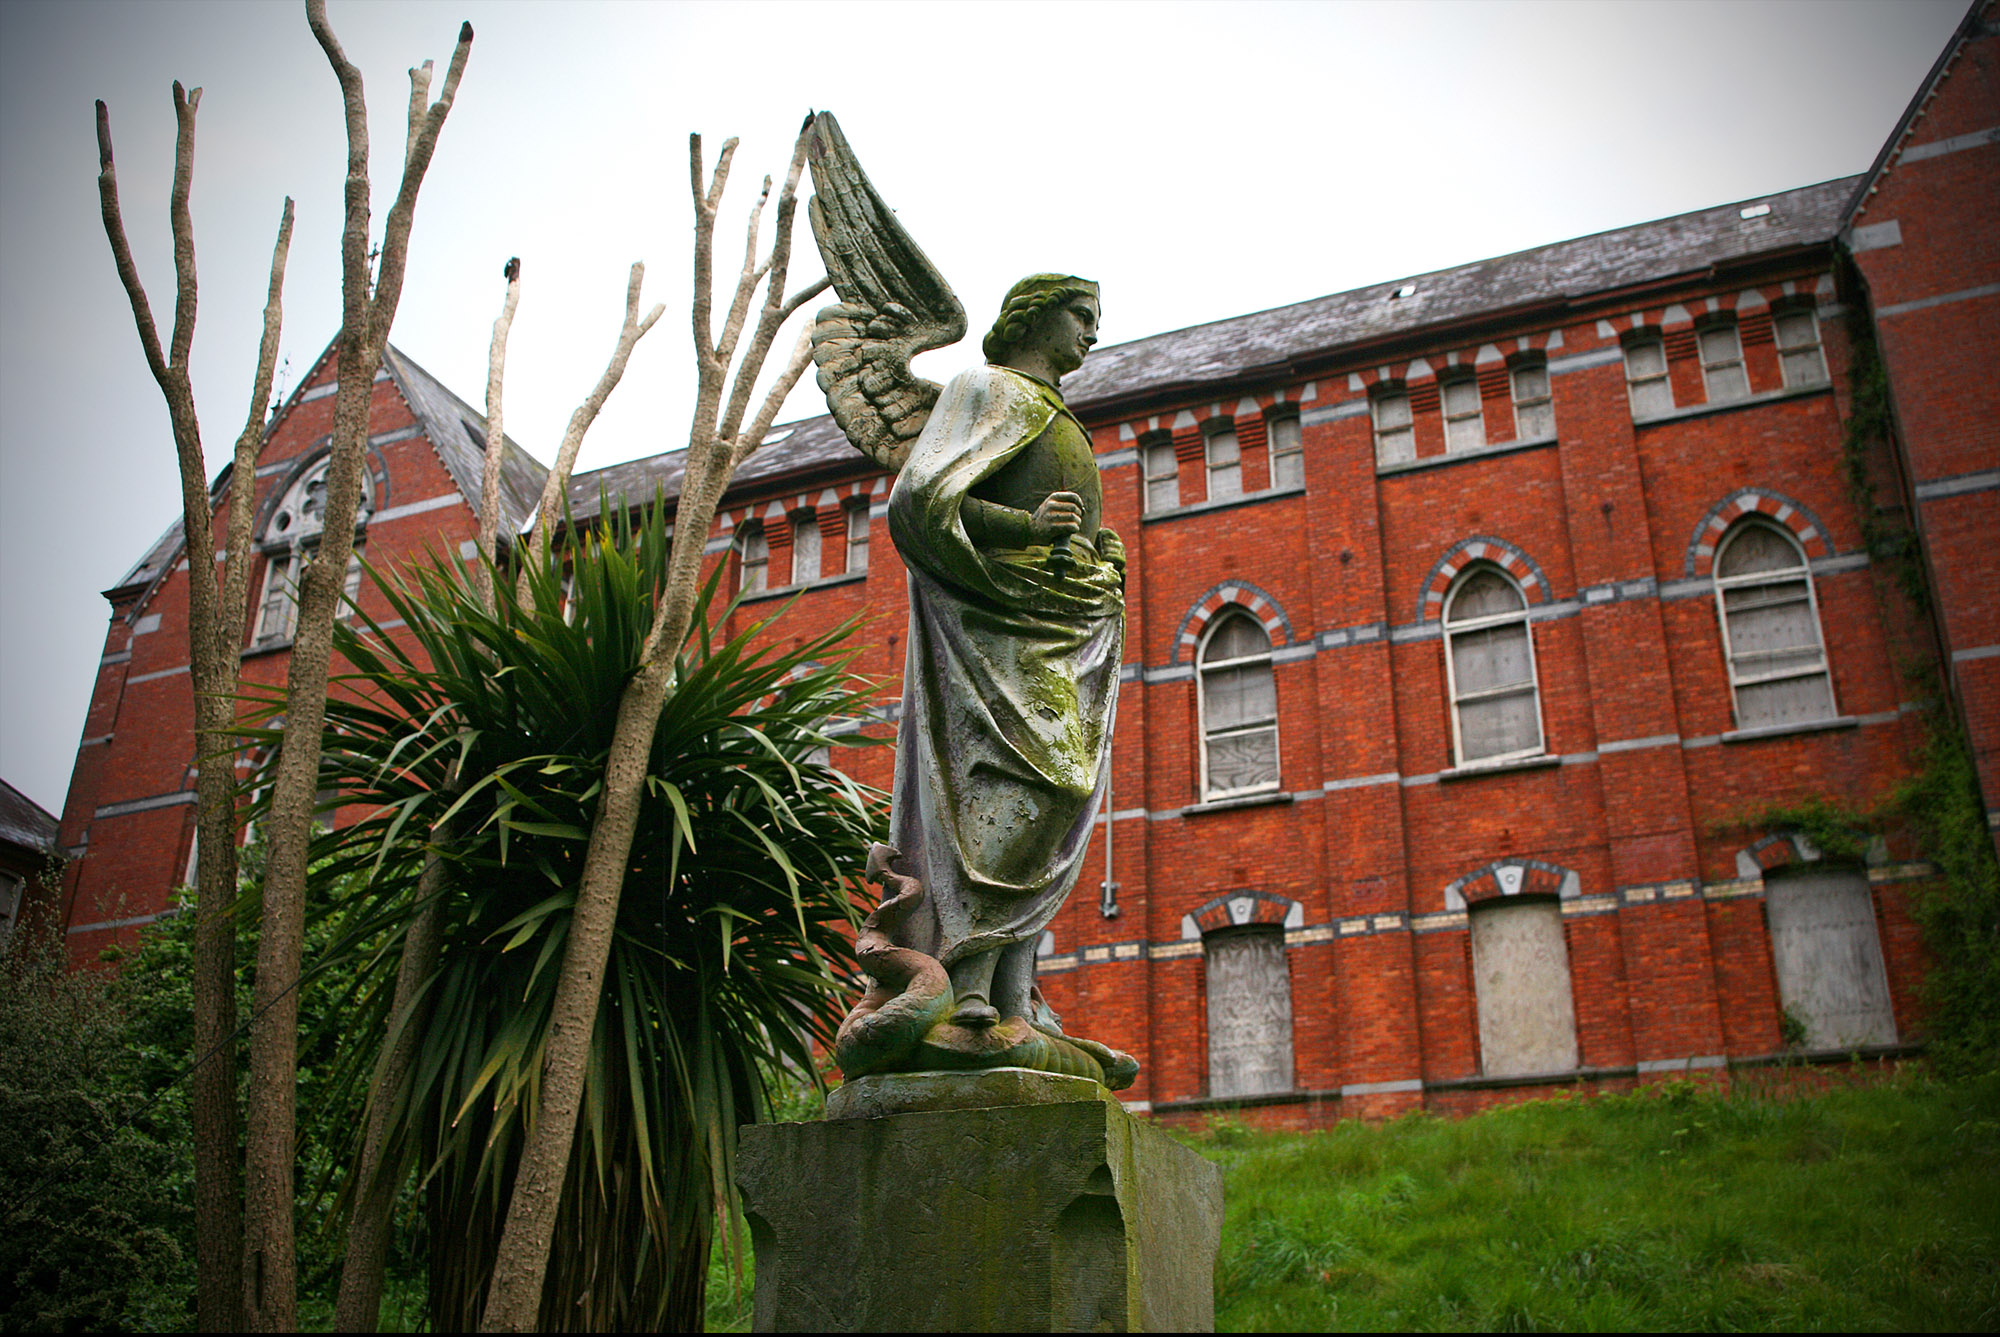 Outside, an angel statute stands in front of the building.